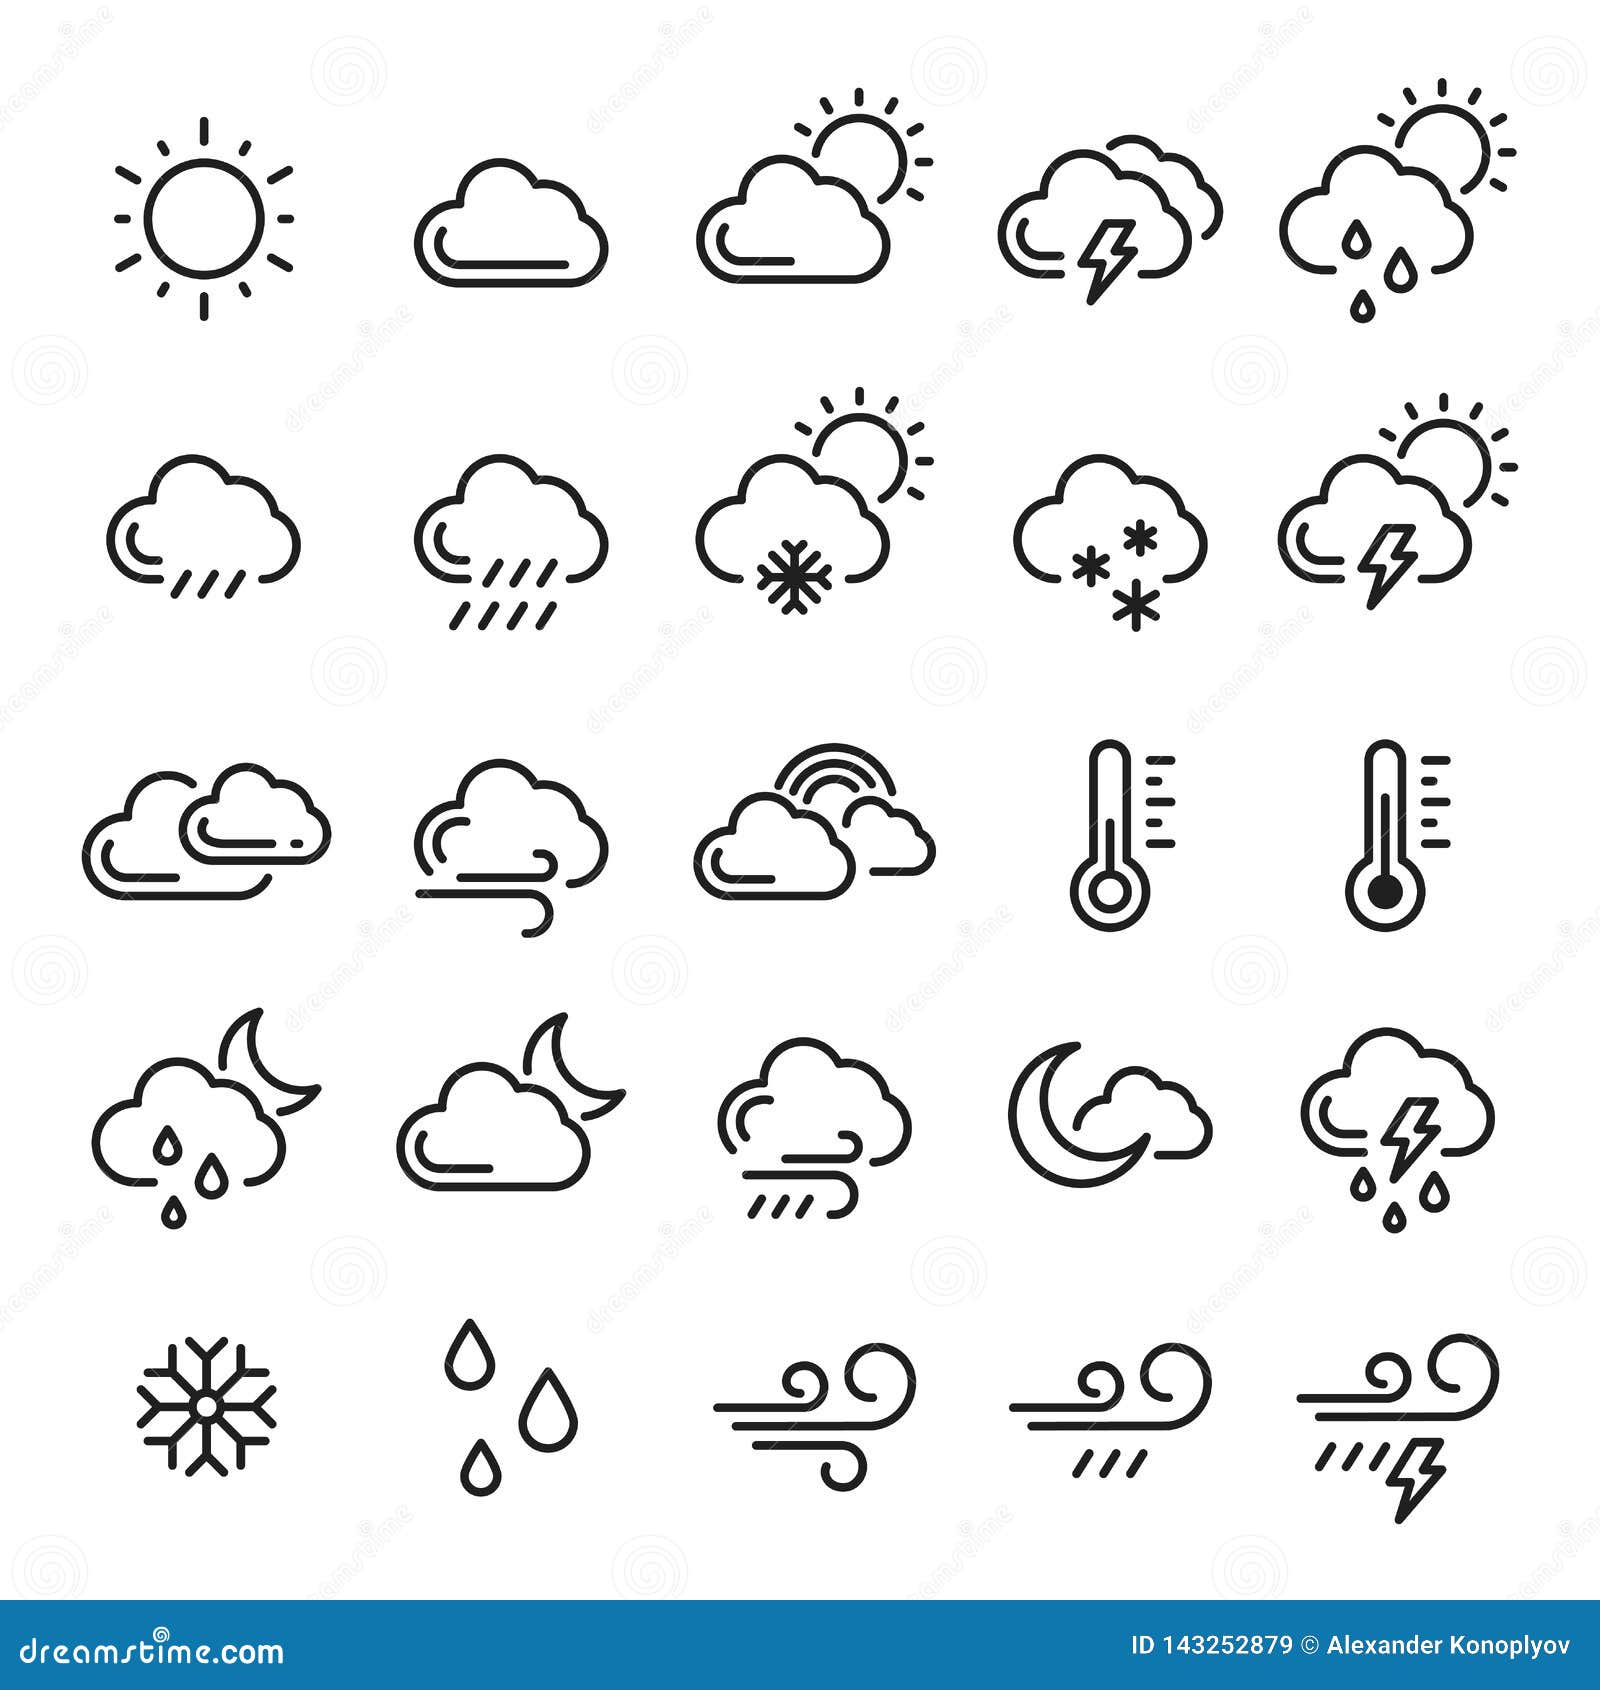 weather icon set, meteorology and climate 